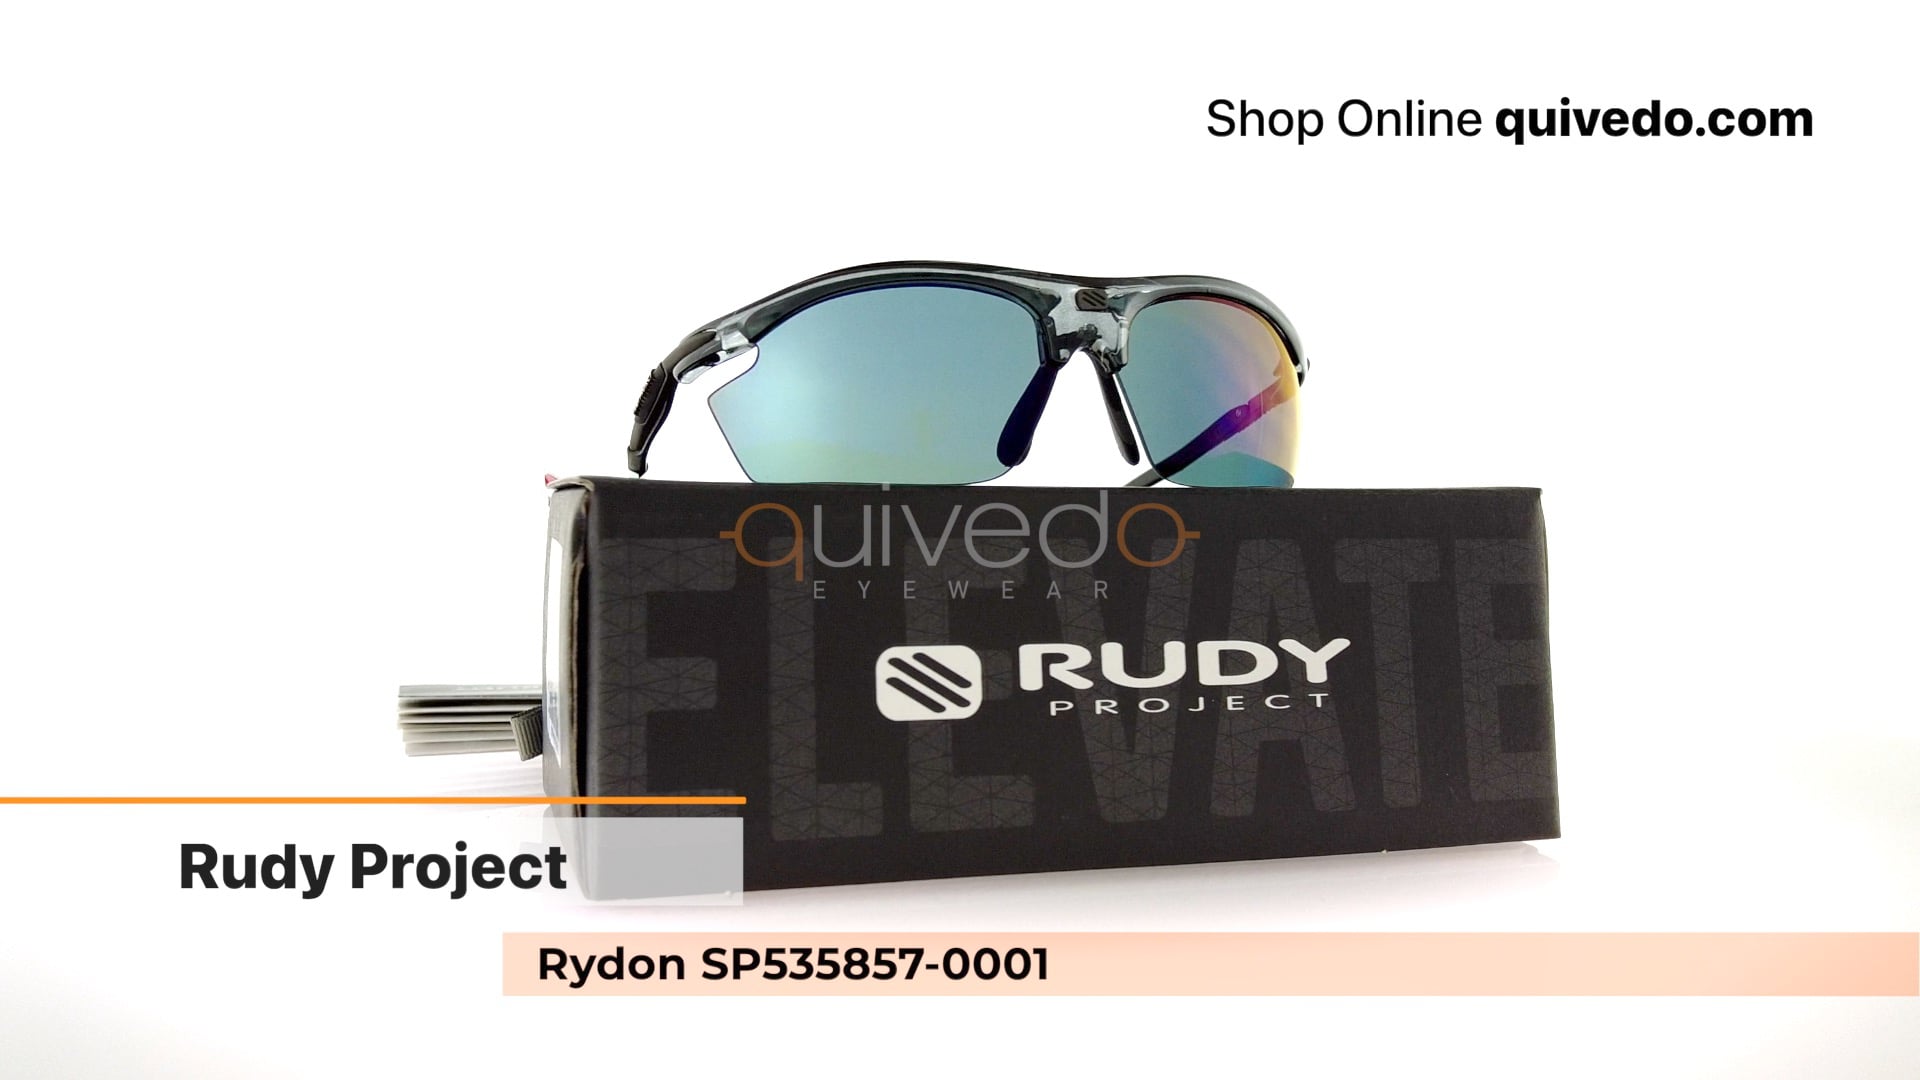 Rudy Project Rydon SP535857-0001